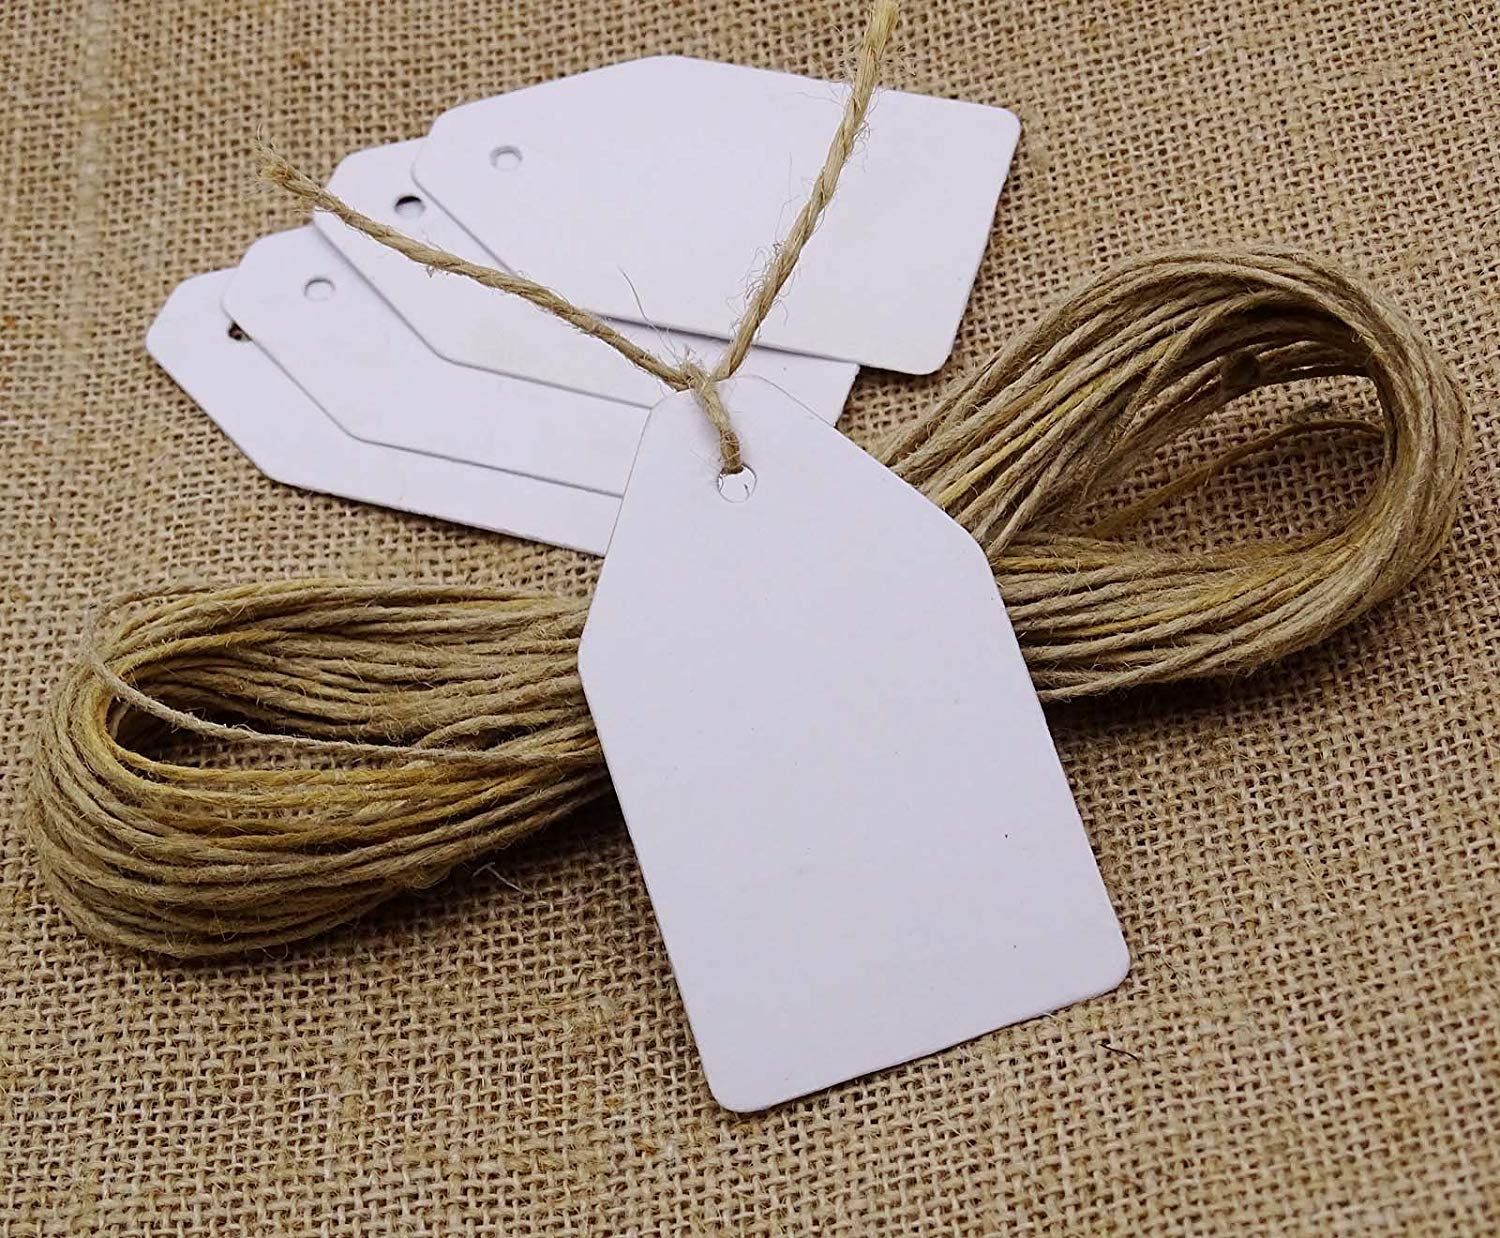 100pcs White Paper Hang Tags Wedding Party Favor Label Gift Cards String